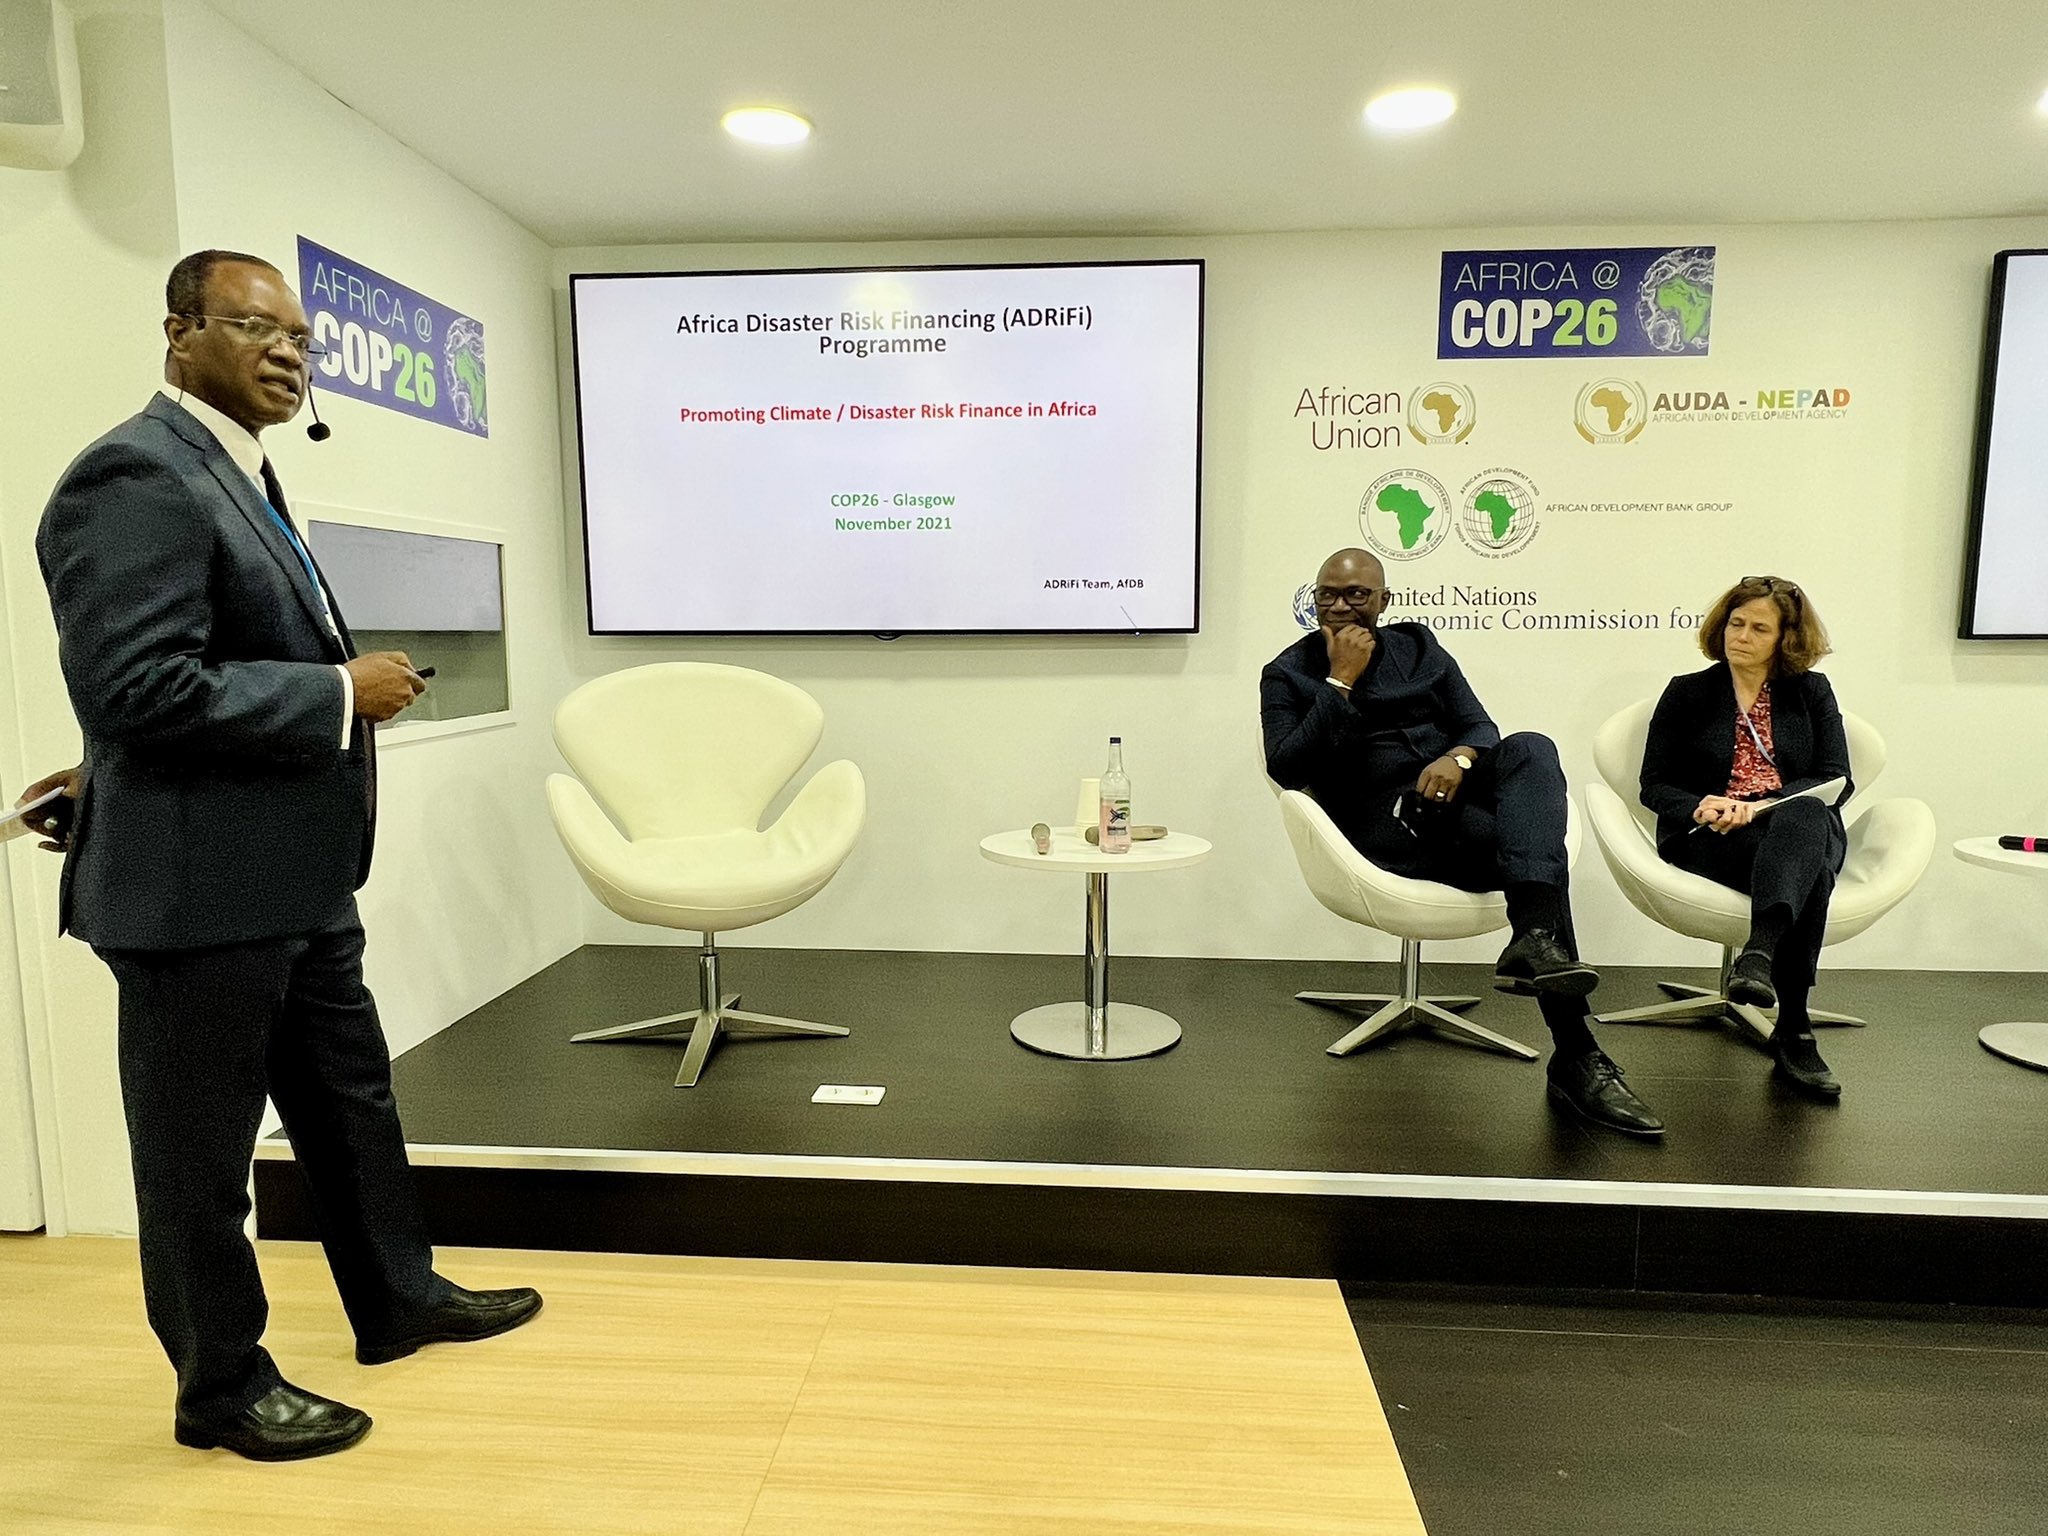 Afdb's side-event